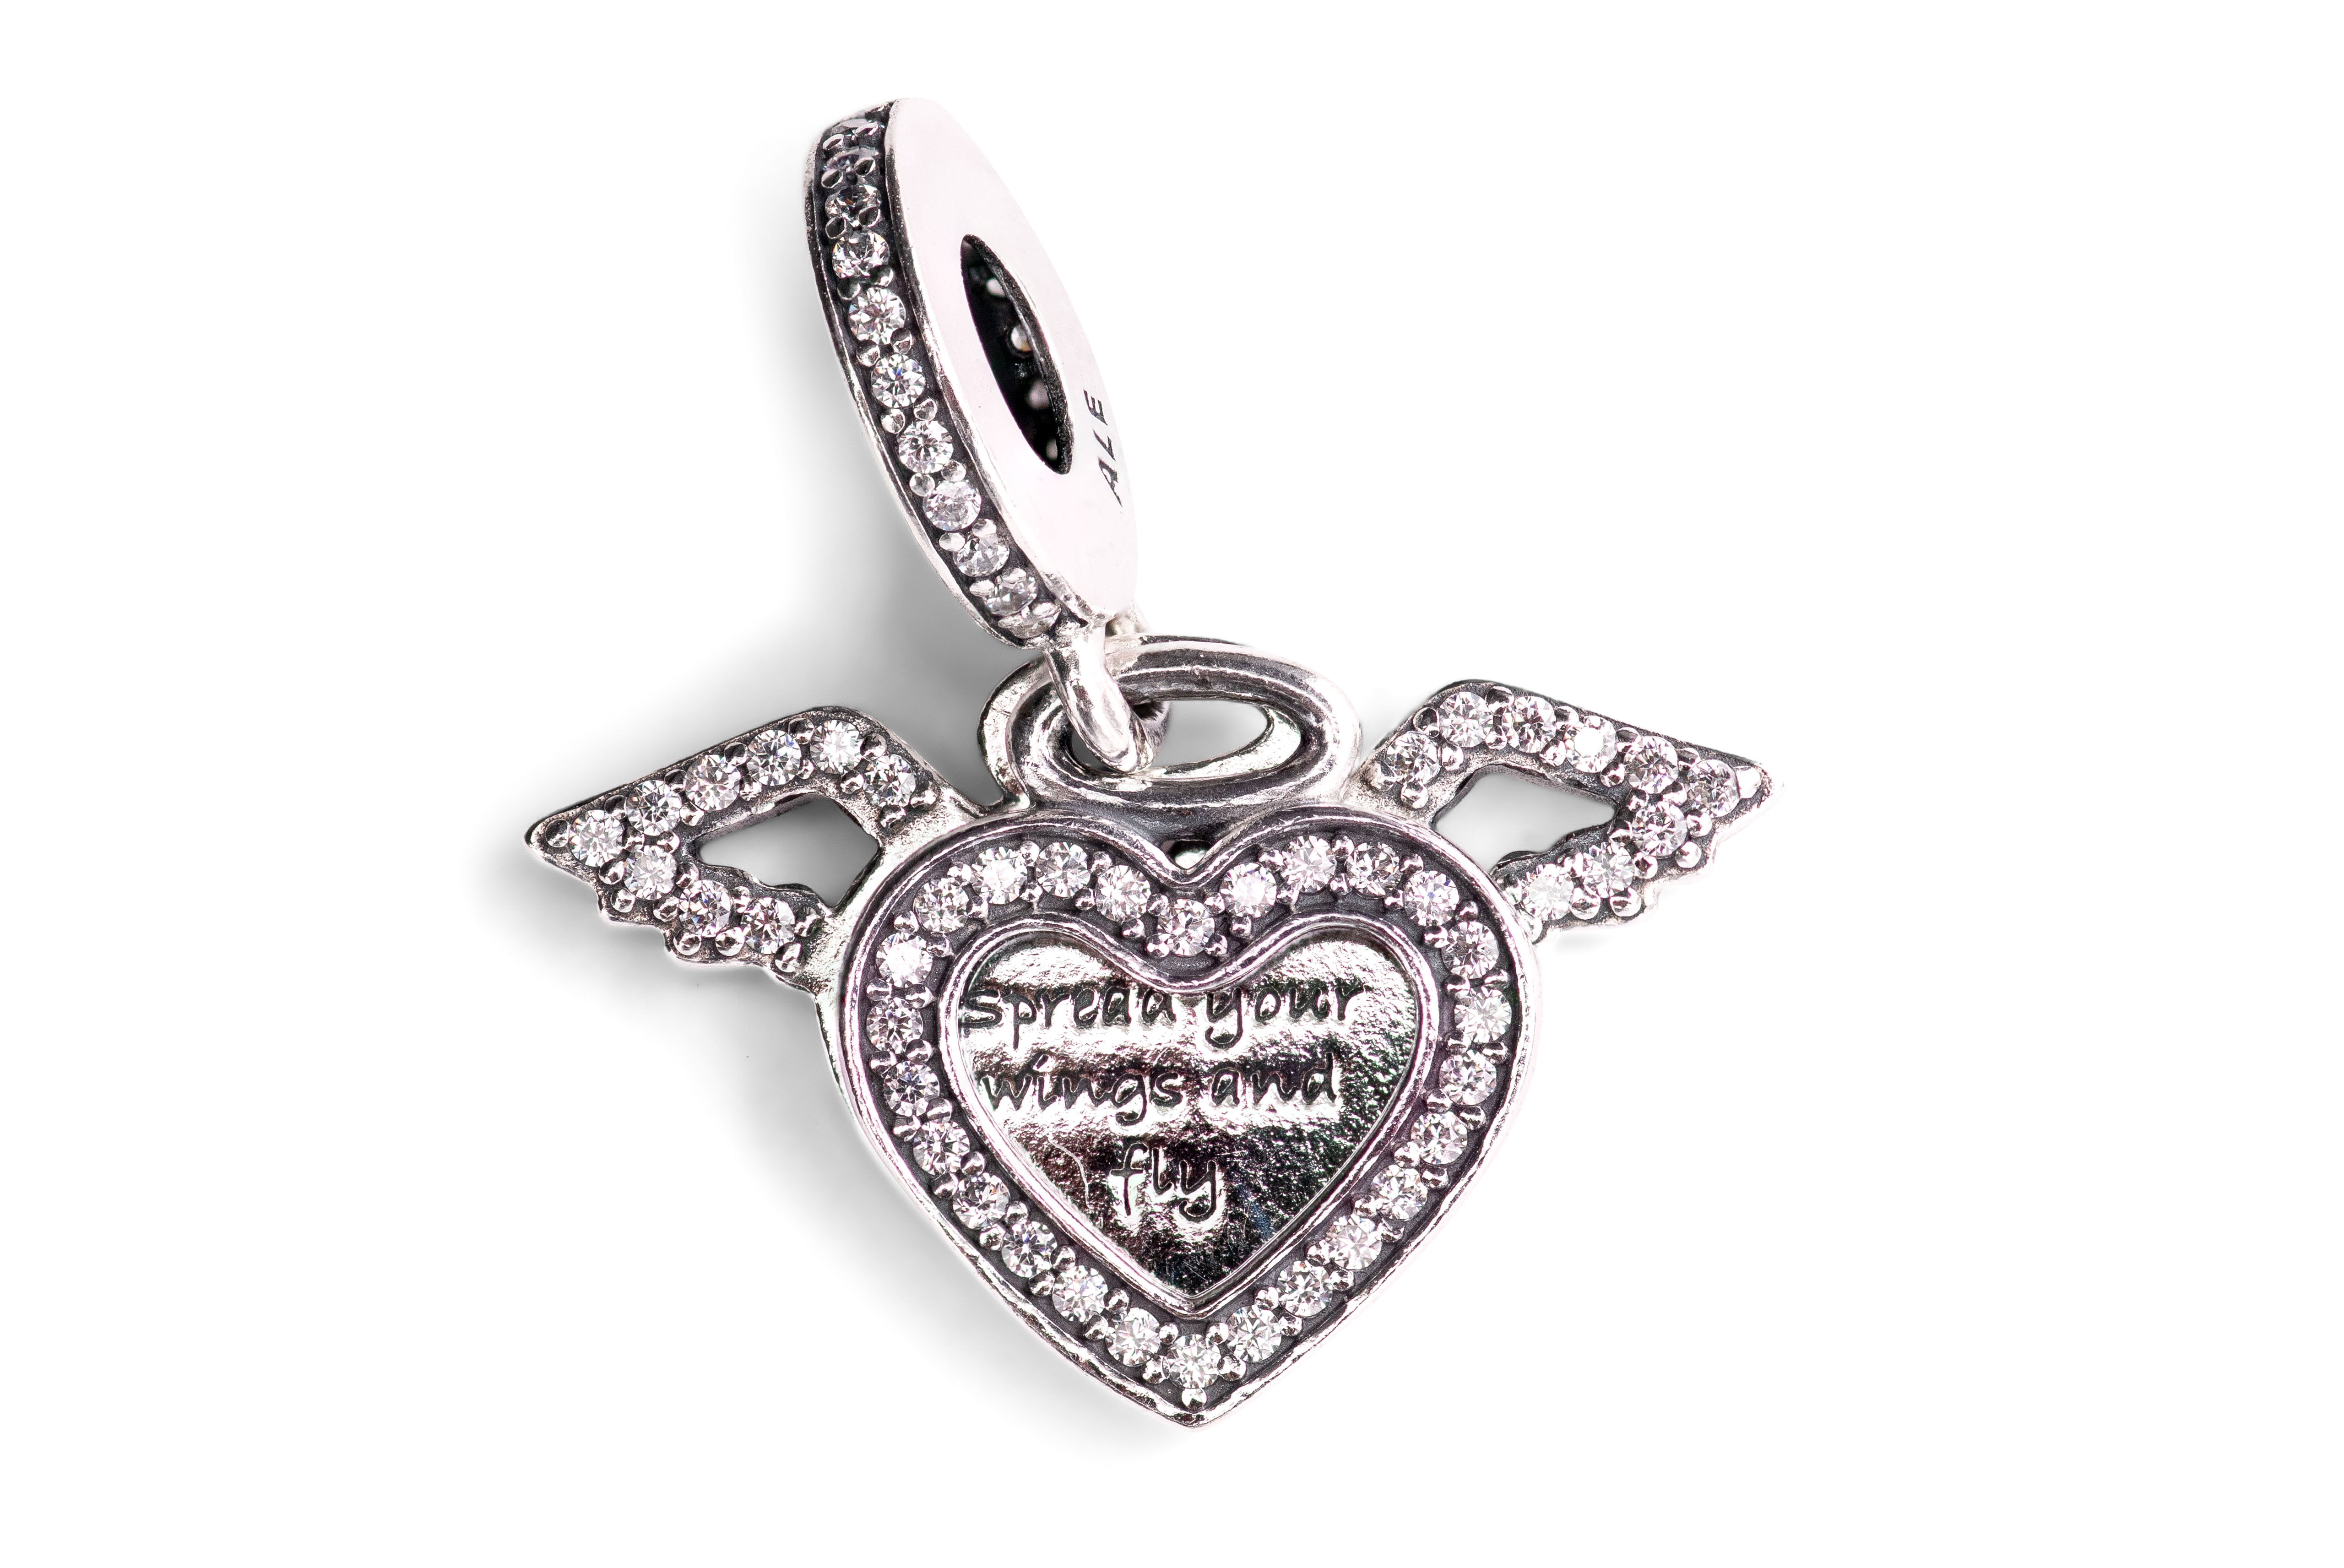 Solid 925 Sterling Silver Dangling Heart with Wings Charm Bead